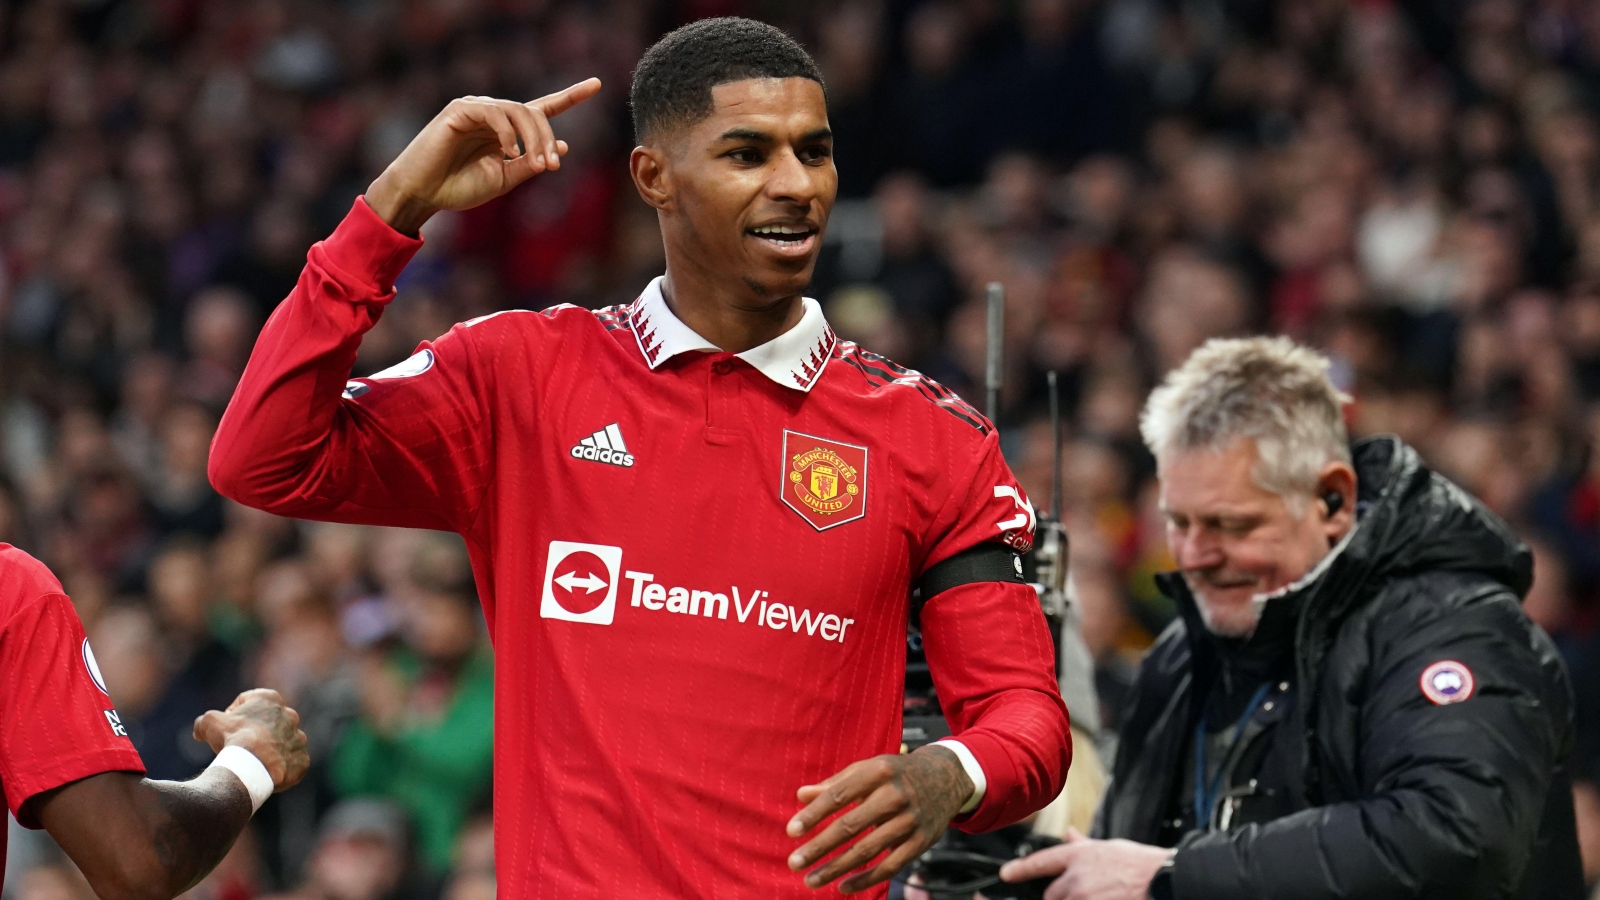 Marcus Rashford celebrates scoring for Manchester United in their Premier League victory over Crystal Palace at Old Trafford, Manchester, February 2023.